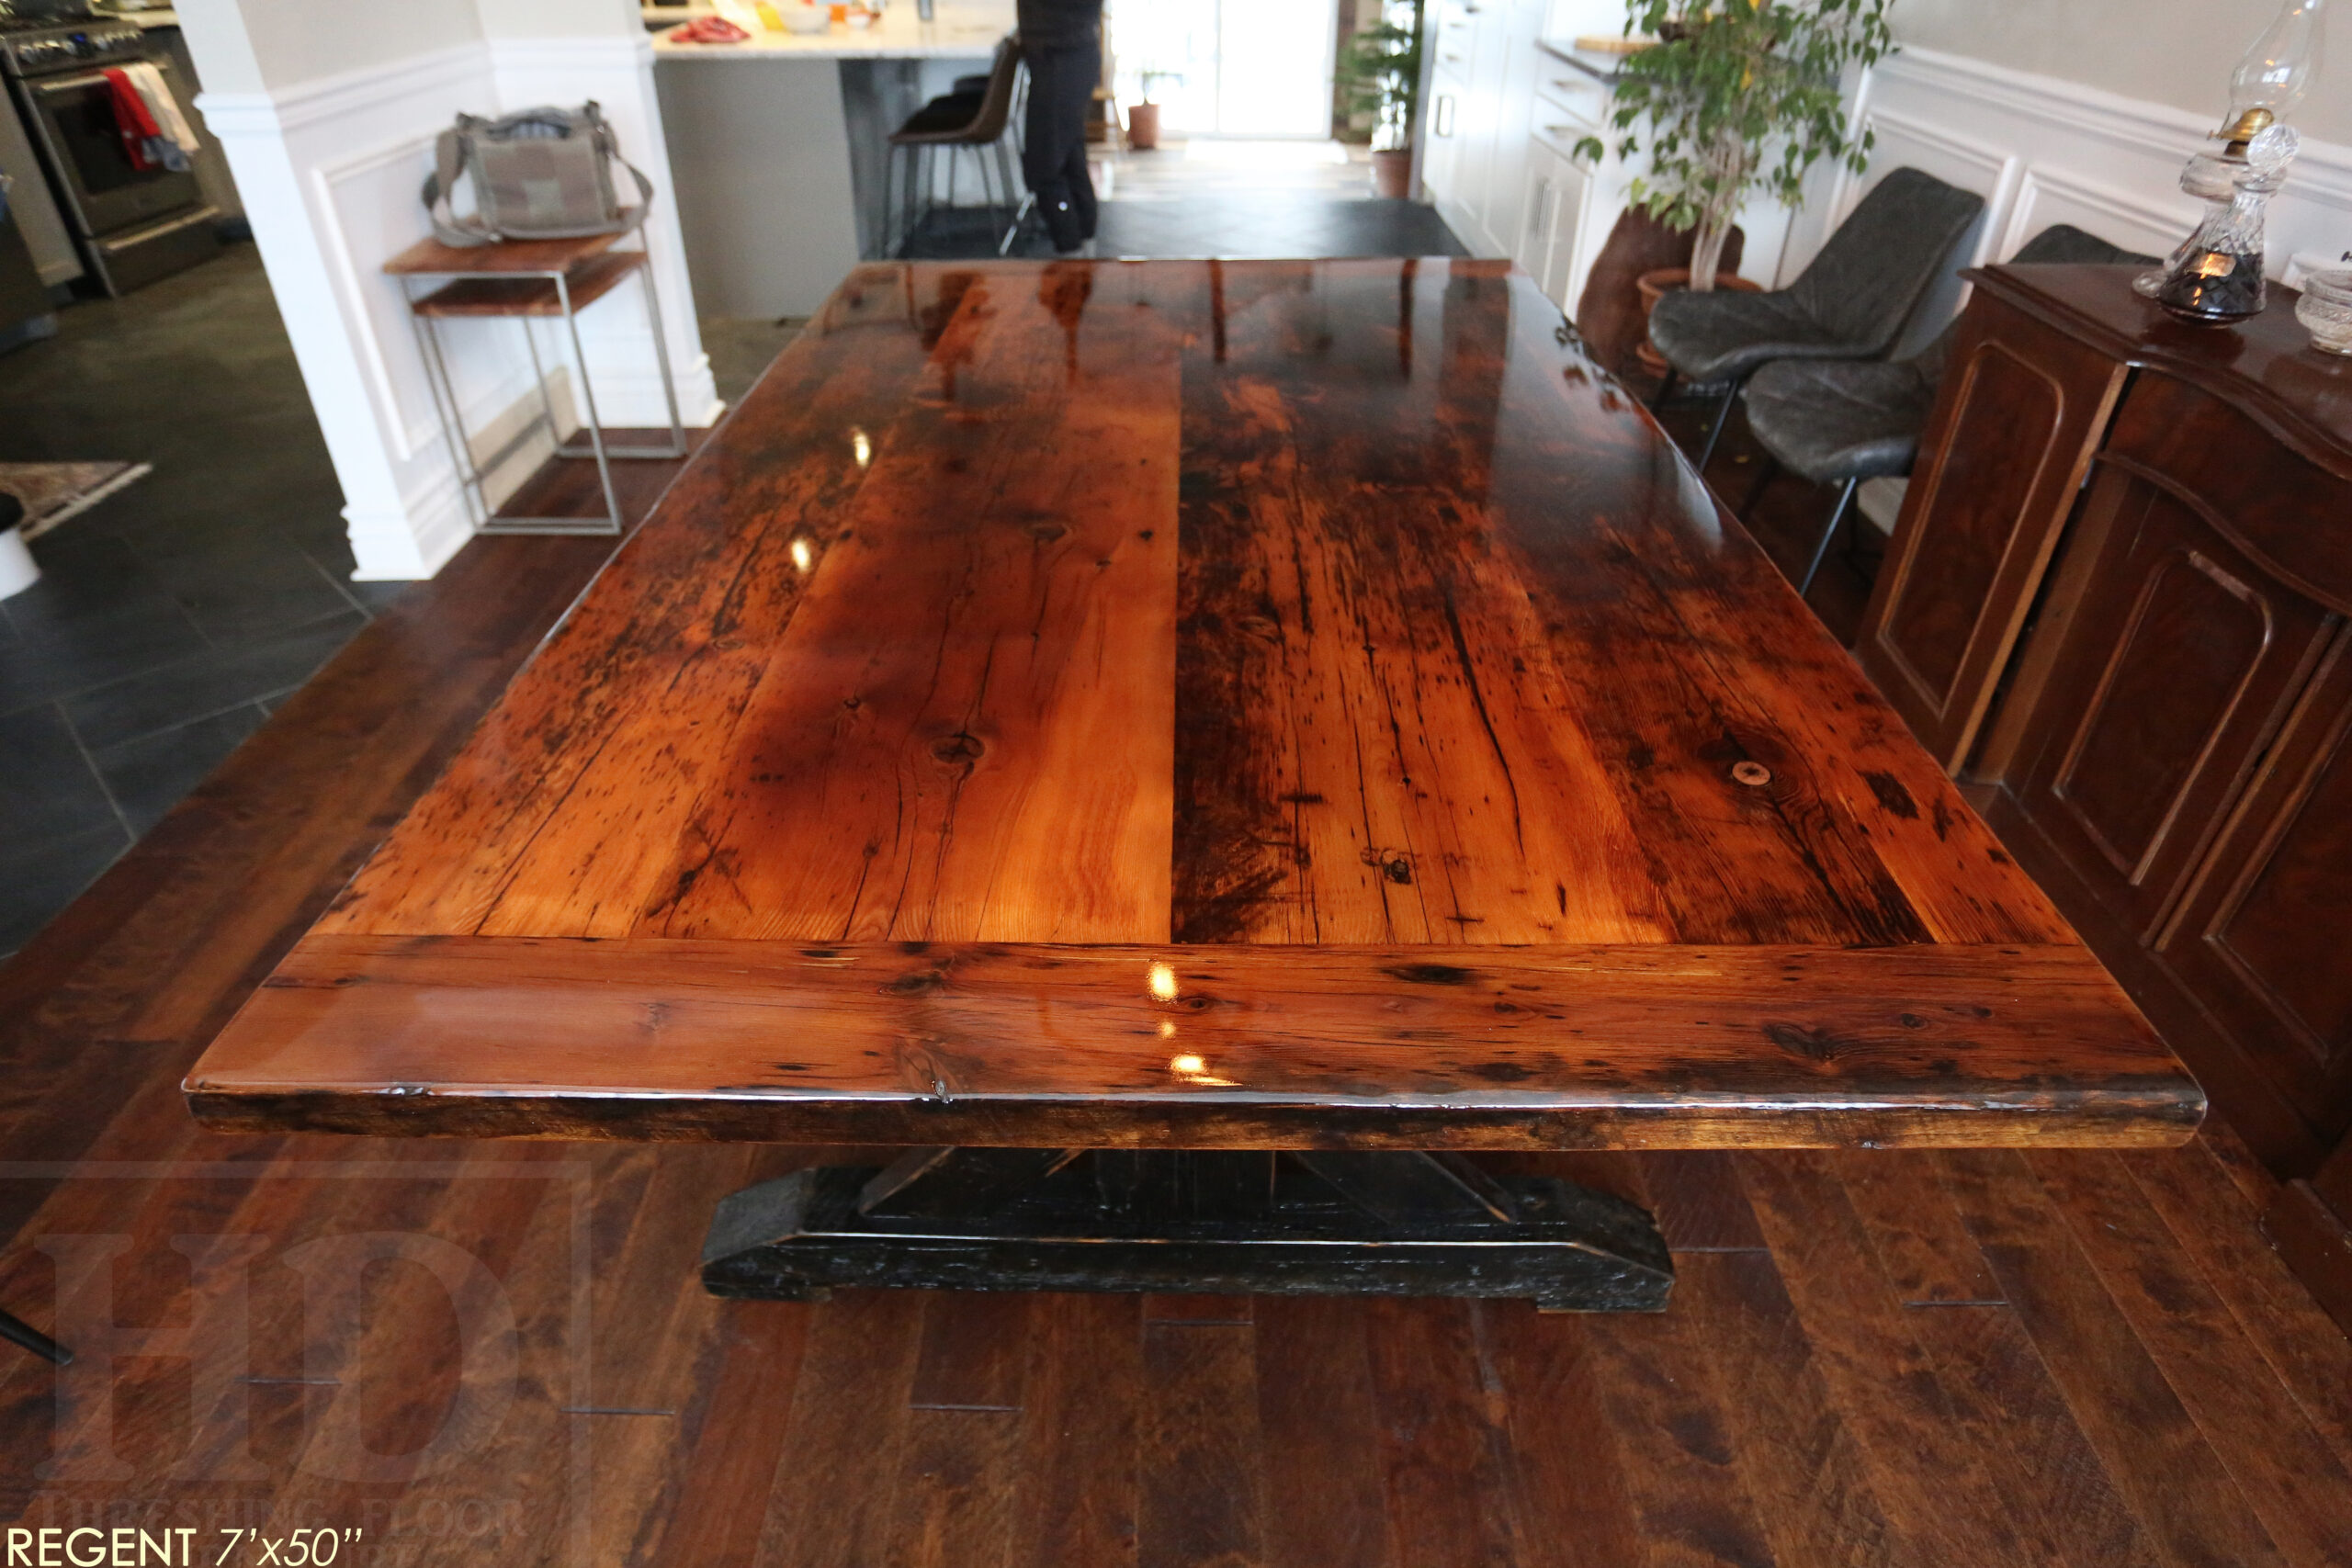 7 ft Reclaimed Ontario Barnwood Table we made for a Cambridge, Ontario home - 50” wide – Sawbuck Base - Reclaimed Hemlock Threshing Floor Construction – Original edges & distressing maintained – Premium epoxy + High Gloss Option polyurethane finish – Black painted with sandthroughs base - www.table.ca